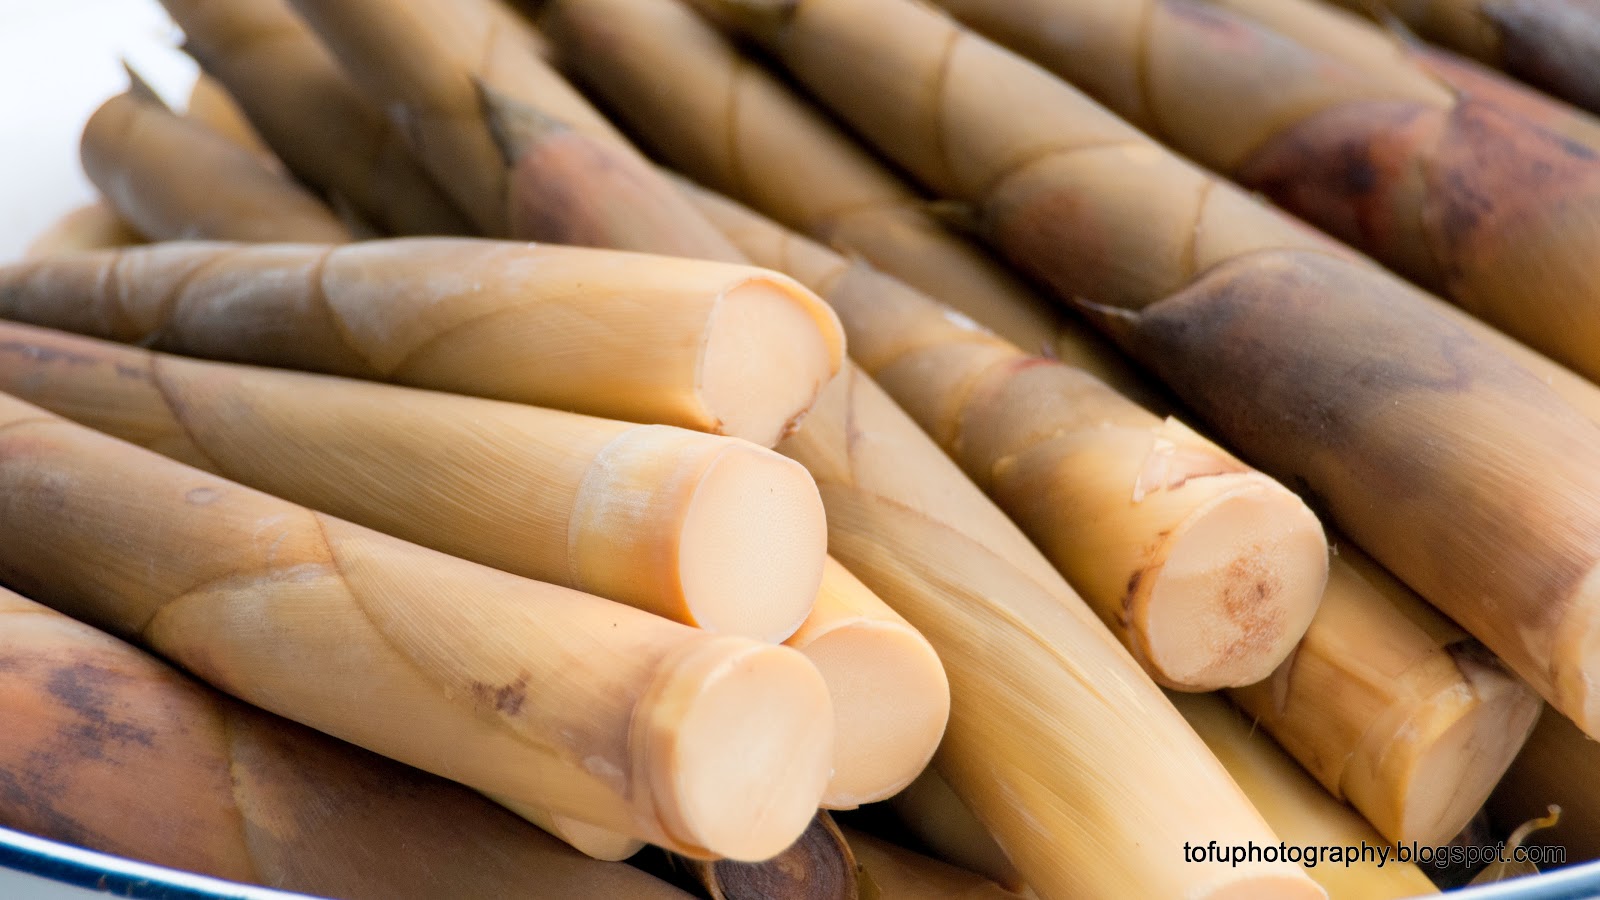 Tofu Photography: Bamboo shoots for sale